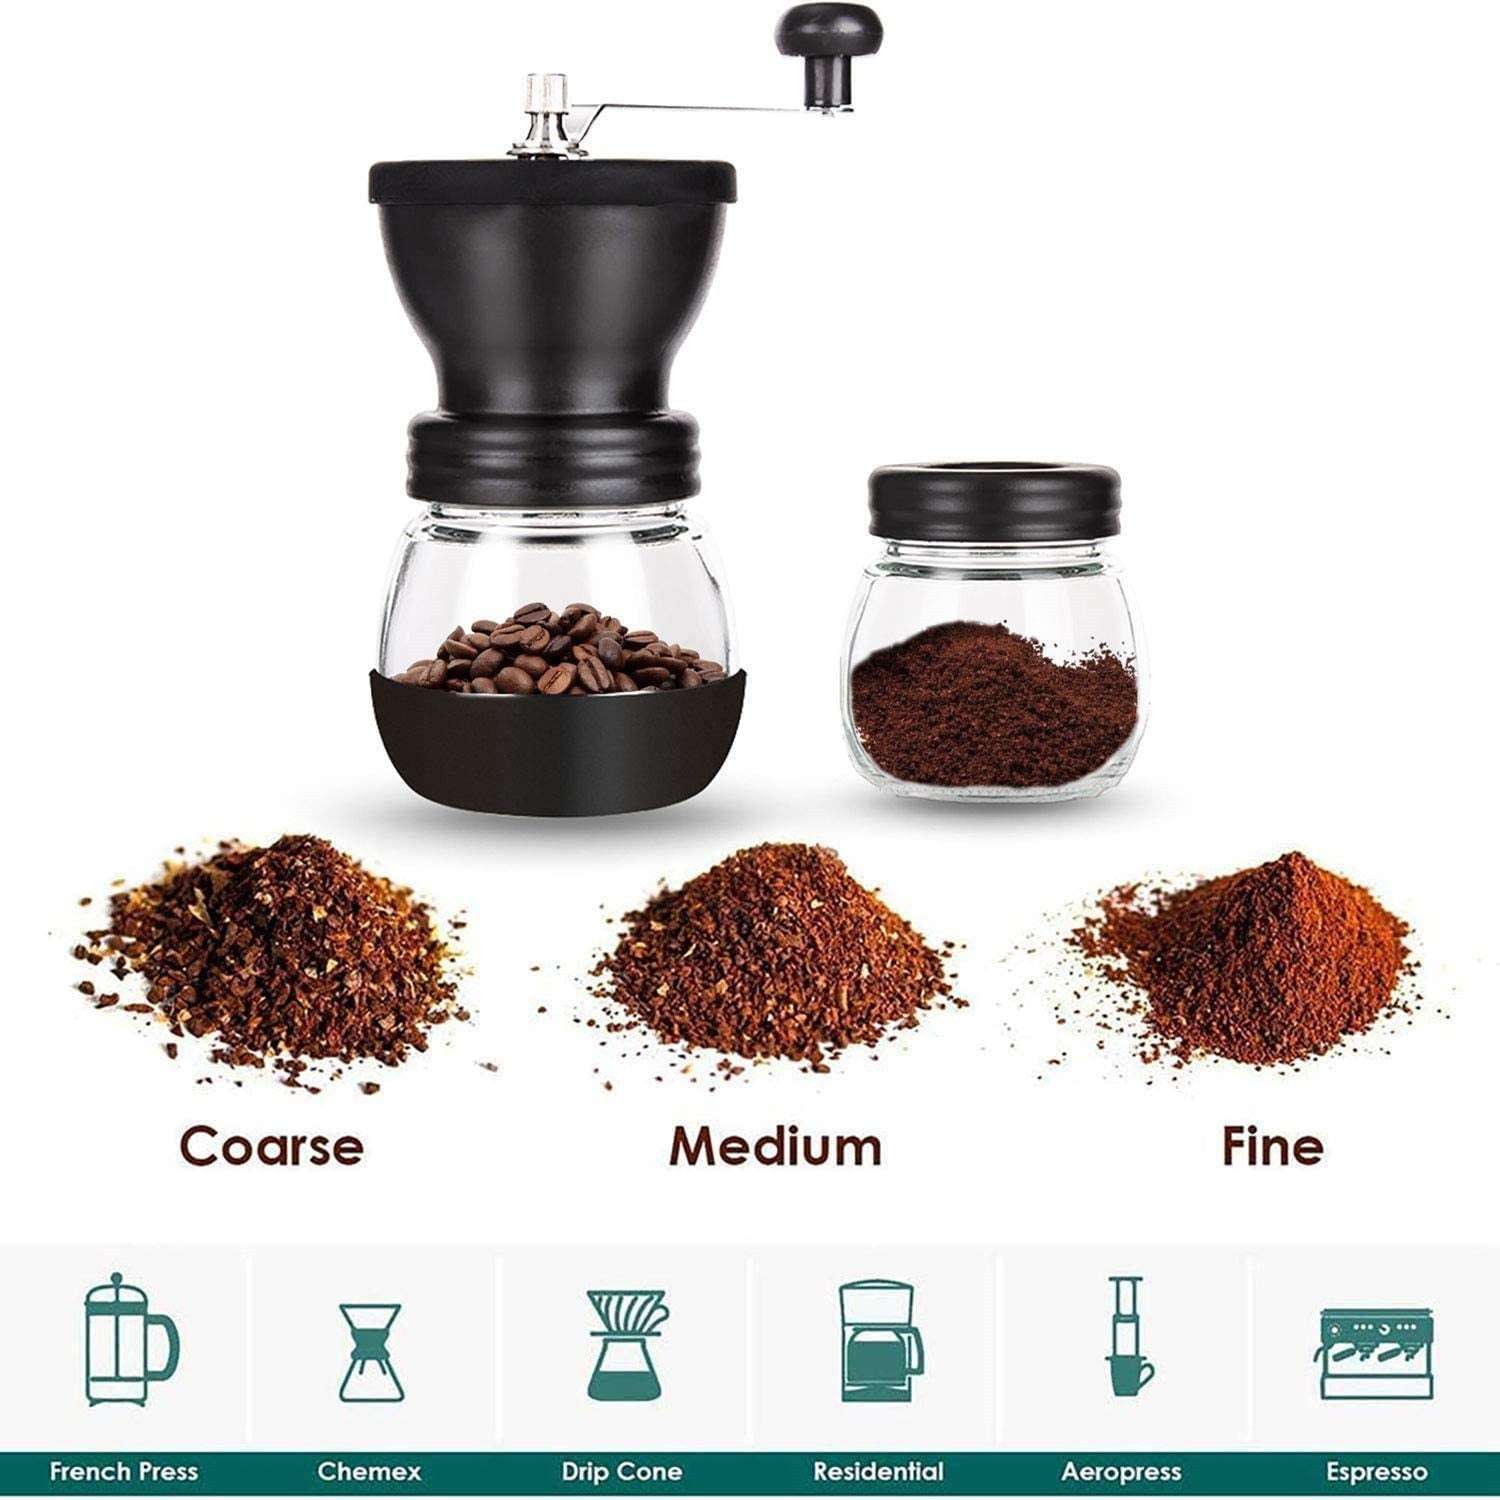 Large Capacity Glass Hand Crank Coffee Bean Grinder (by quicklify)